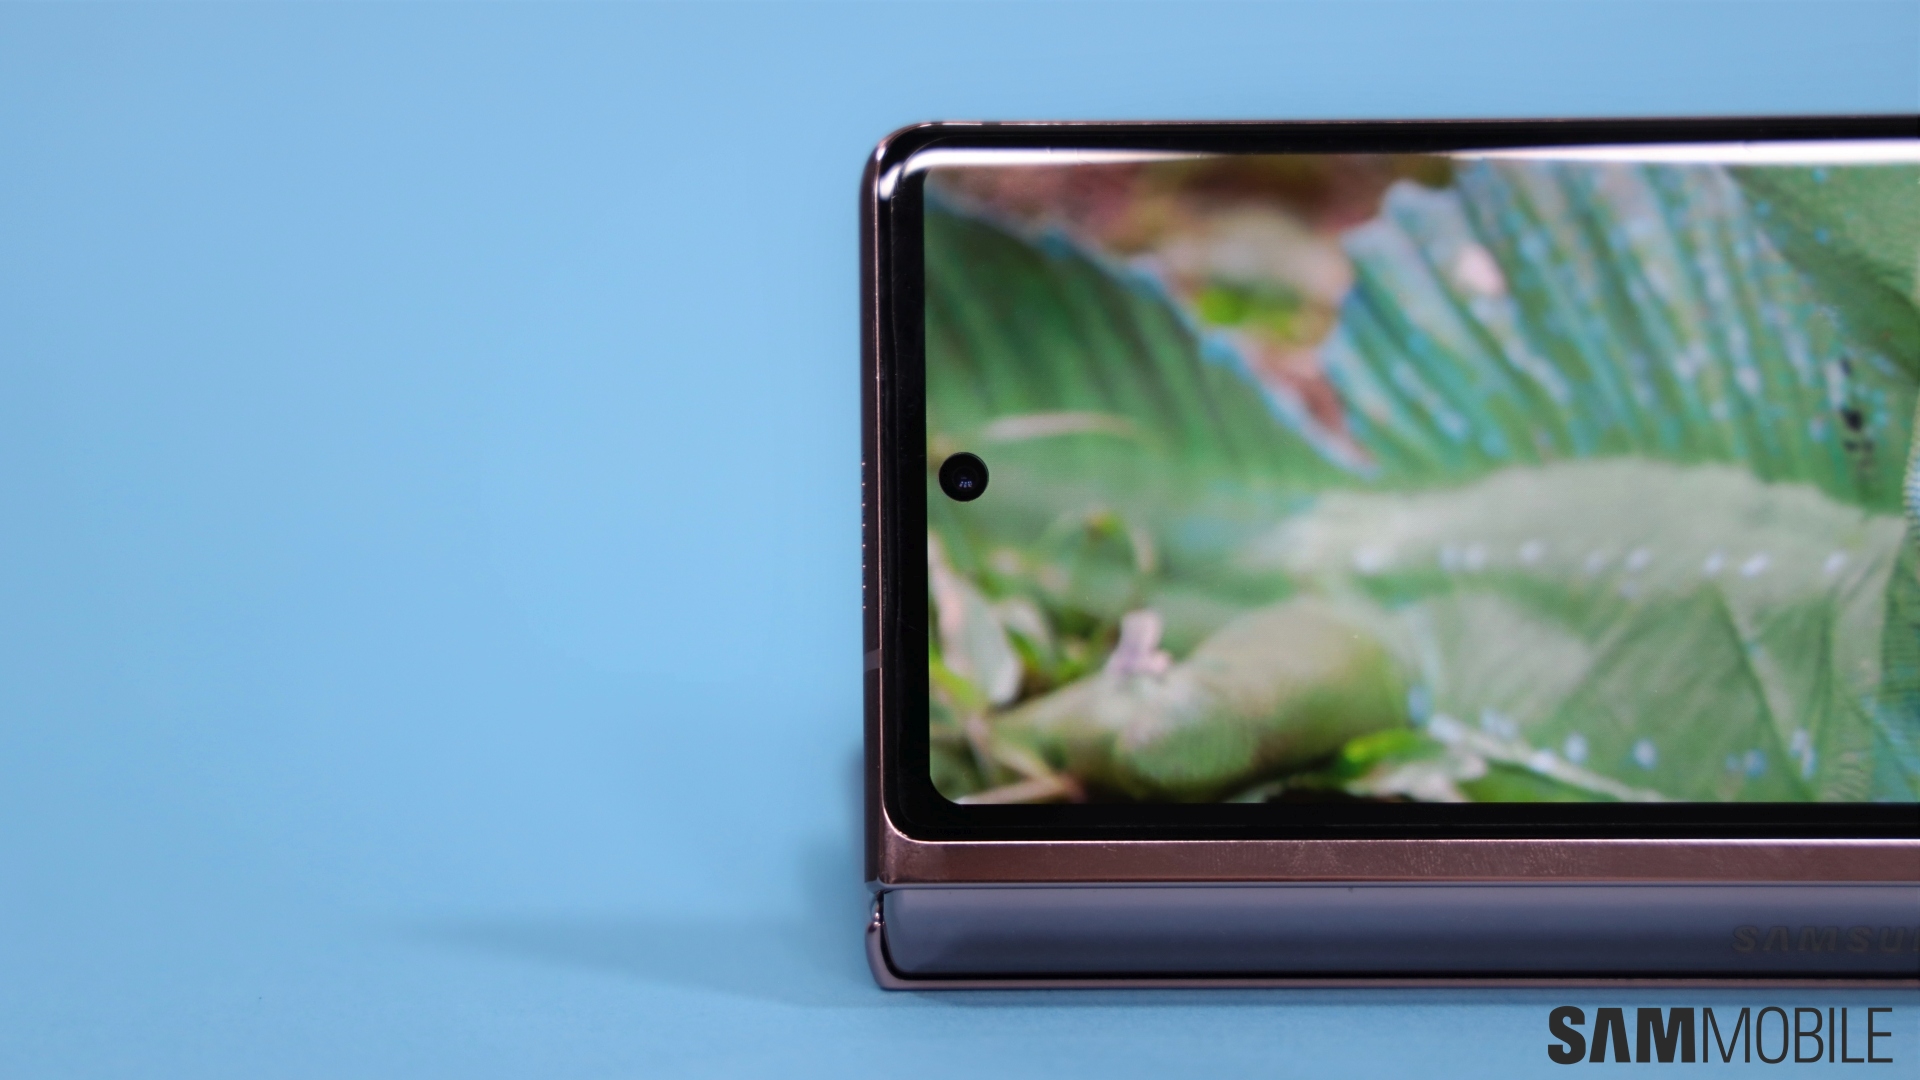 Samsung Galaxy Z Fold 2 review: four months with the folding